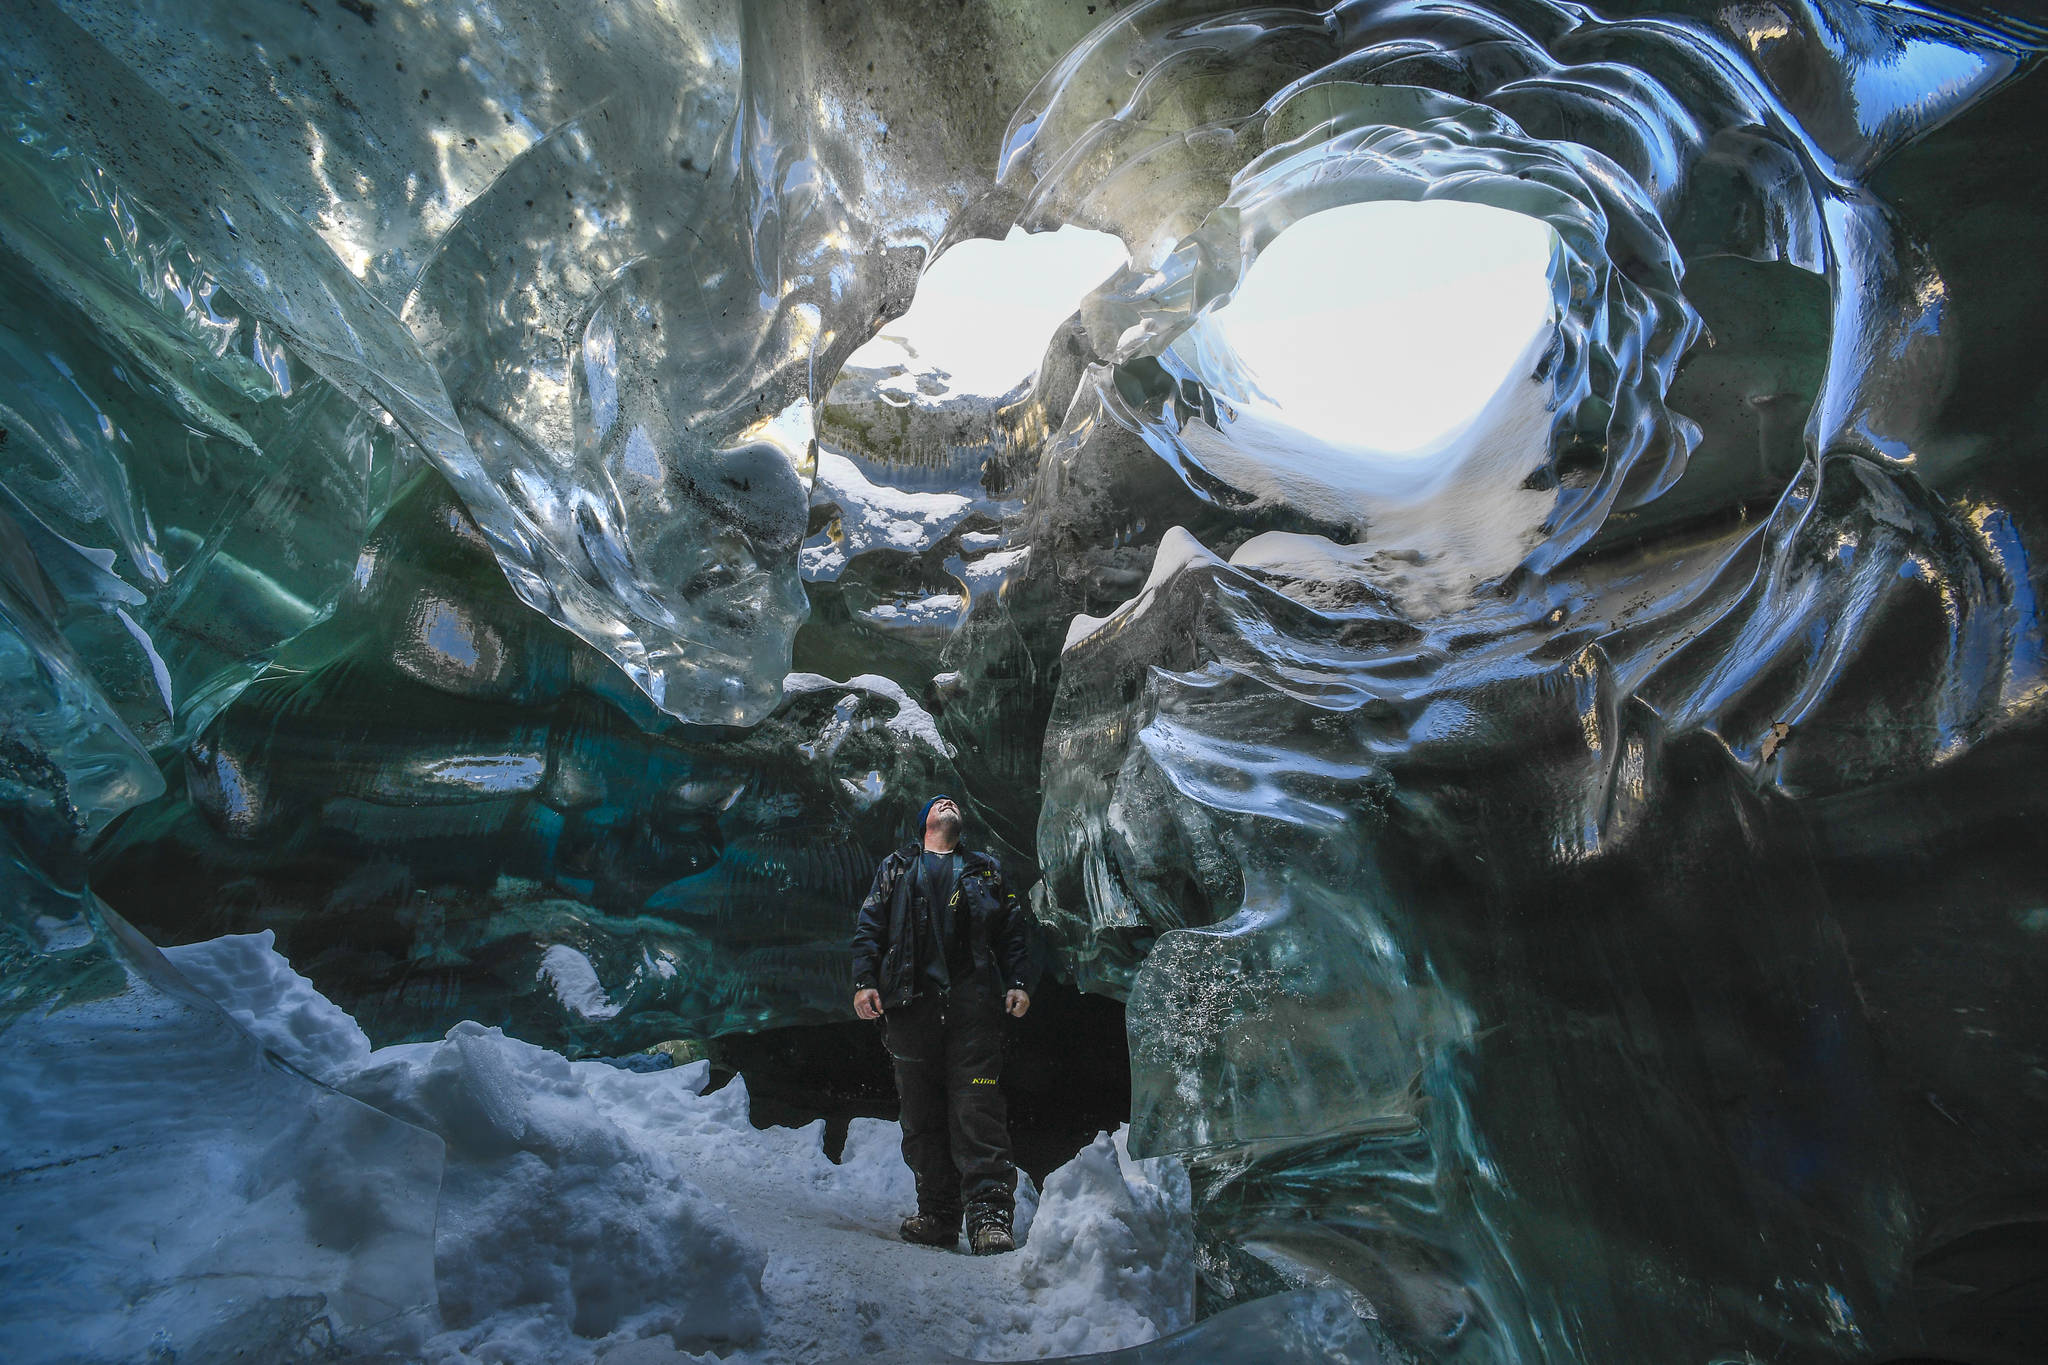 Shawn Lovell explores an ice cave at the Mendenhall Glacier on Monday, Feb. 11, 2019. (Michael Penn | Juneau Empire)